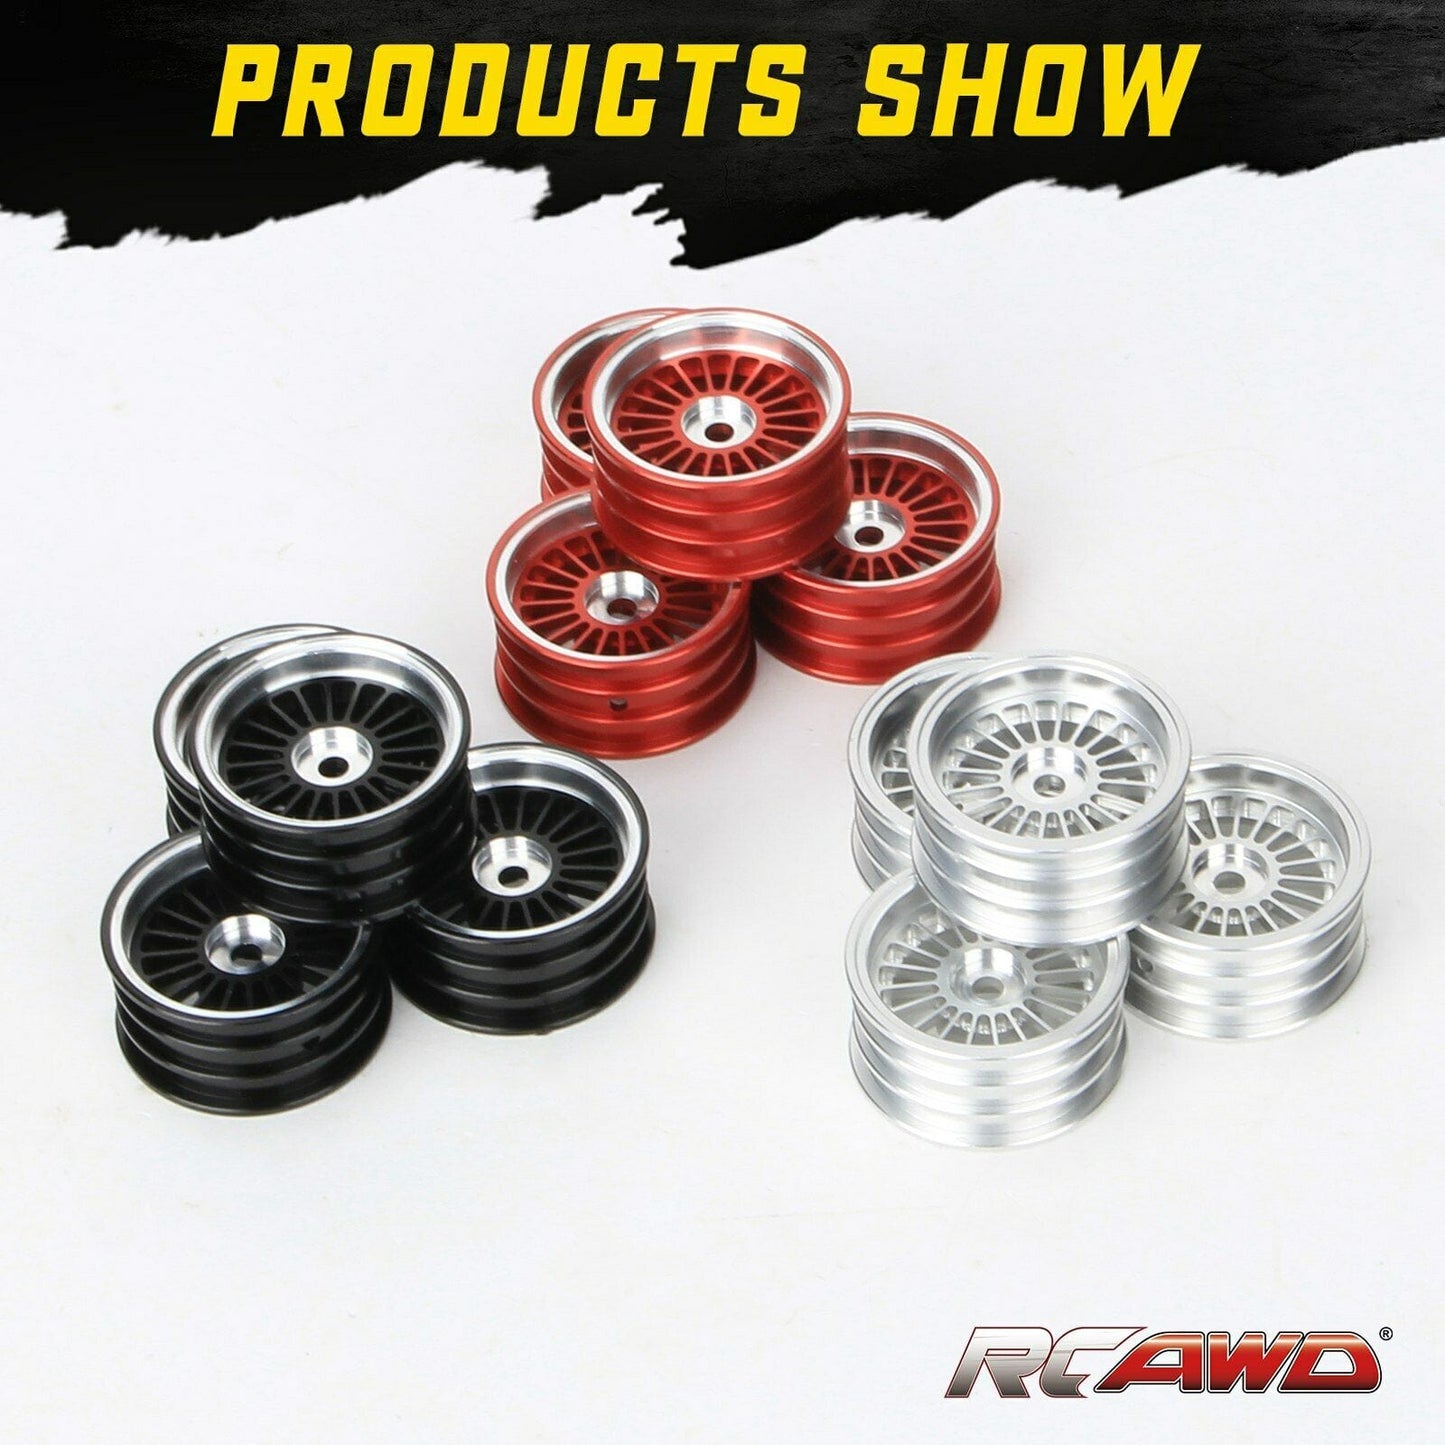 RCAWD Metal Wheel for Axial SCX24 Crawlers SCX2468 - RCAWD